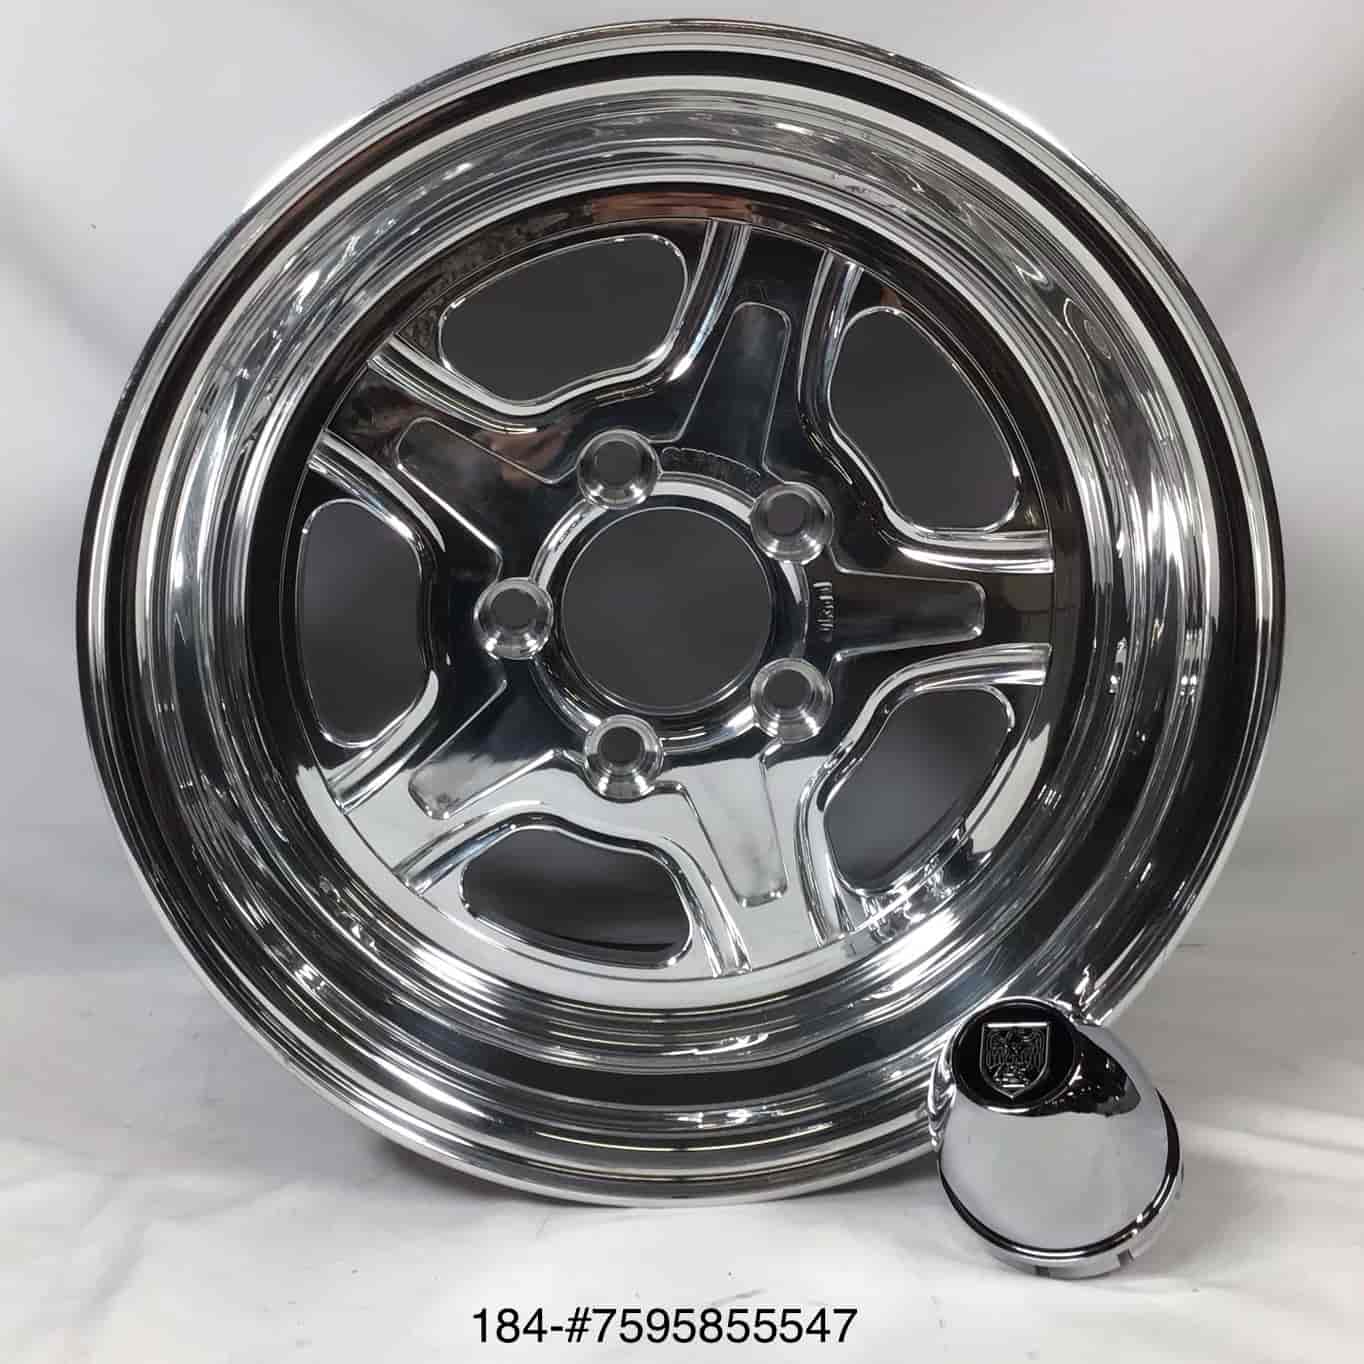 *BLEMISHED* Dicer Series Nitrous Wheel Size: 15" x 8-1/2"